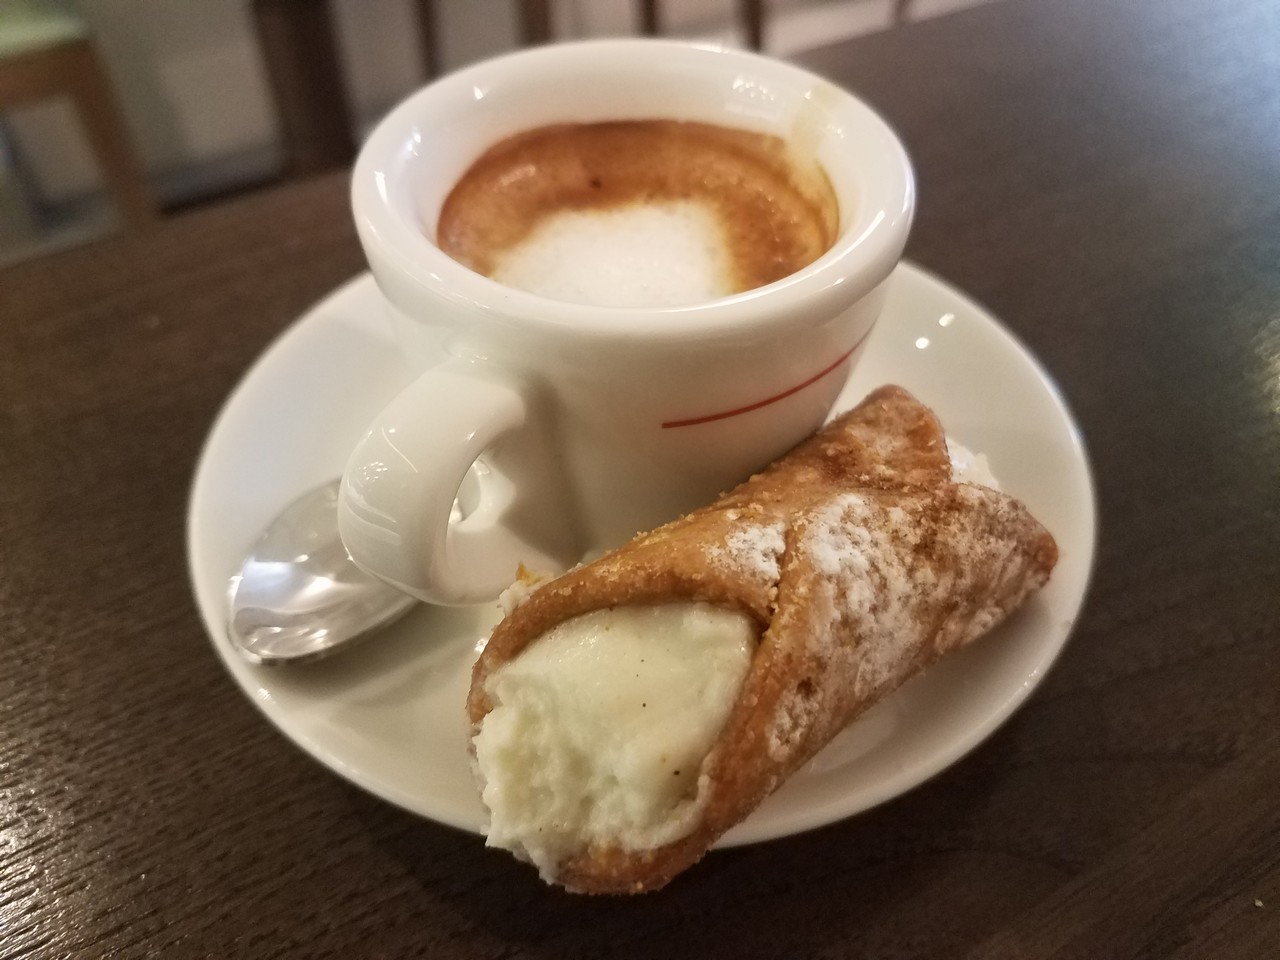 a cup of coffee and a cannoli on a plate